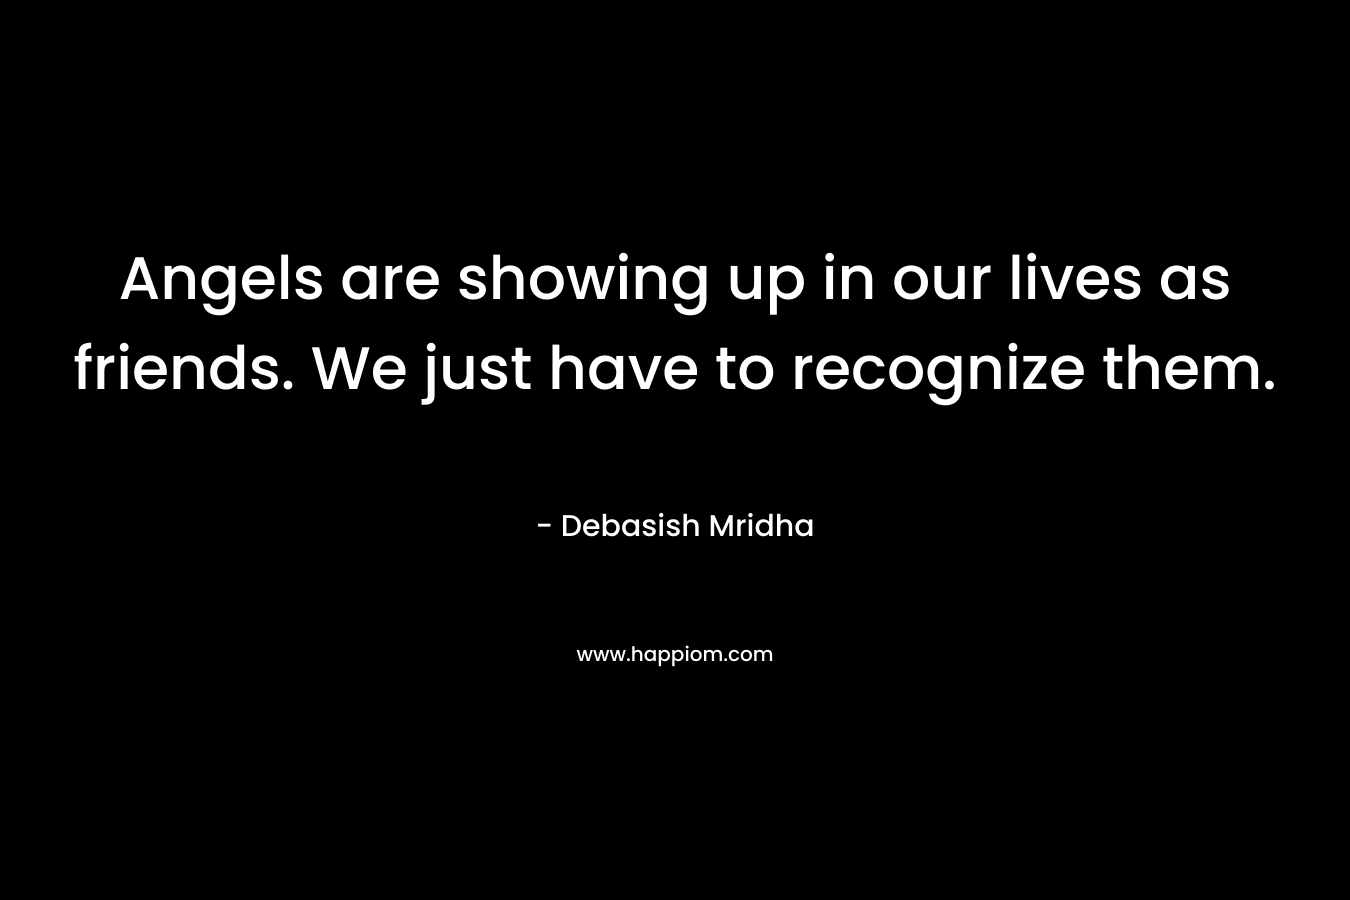 Angels are showing up in our lives as friends. We just have to recognize them.